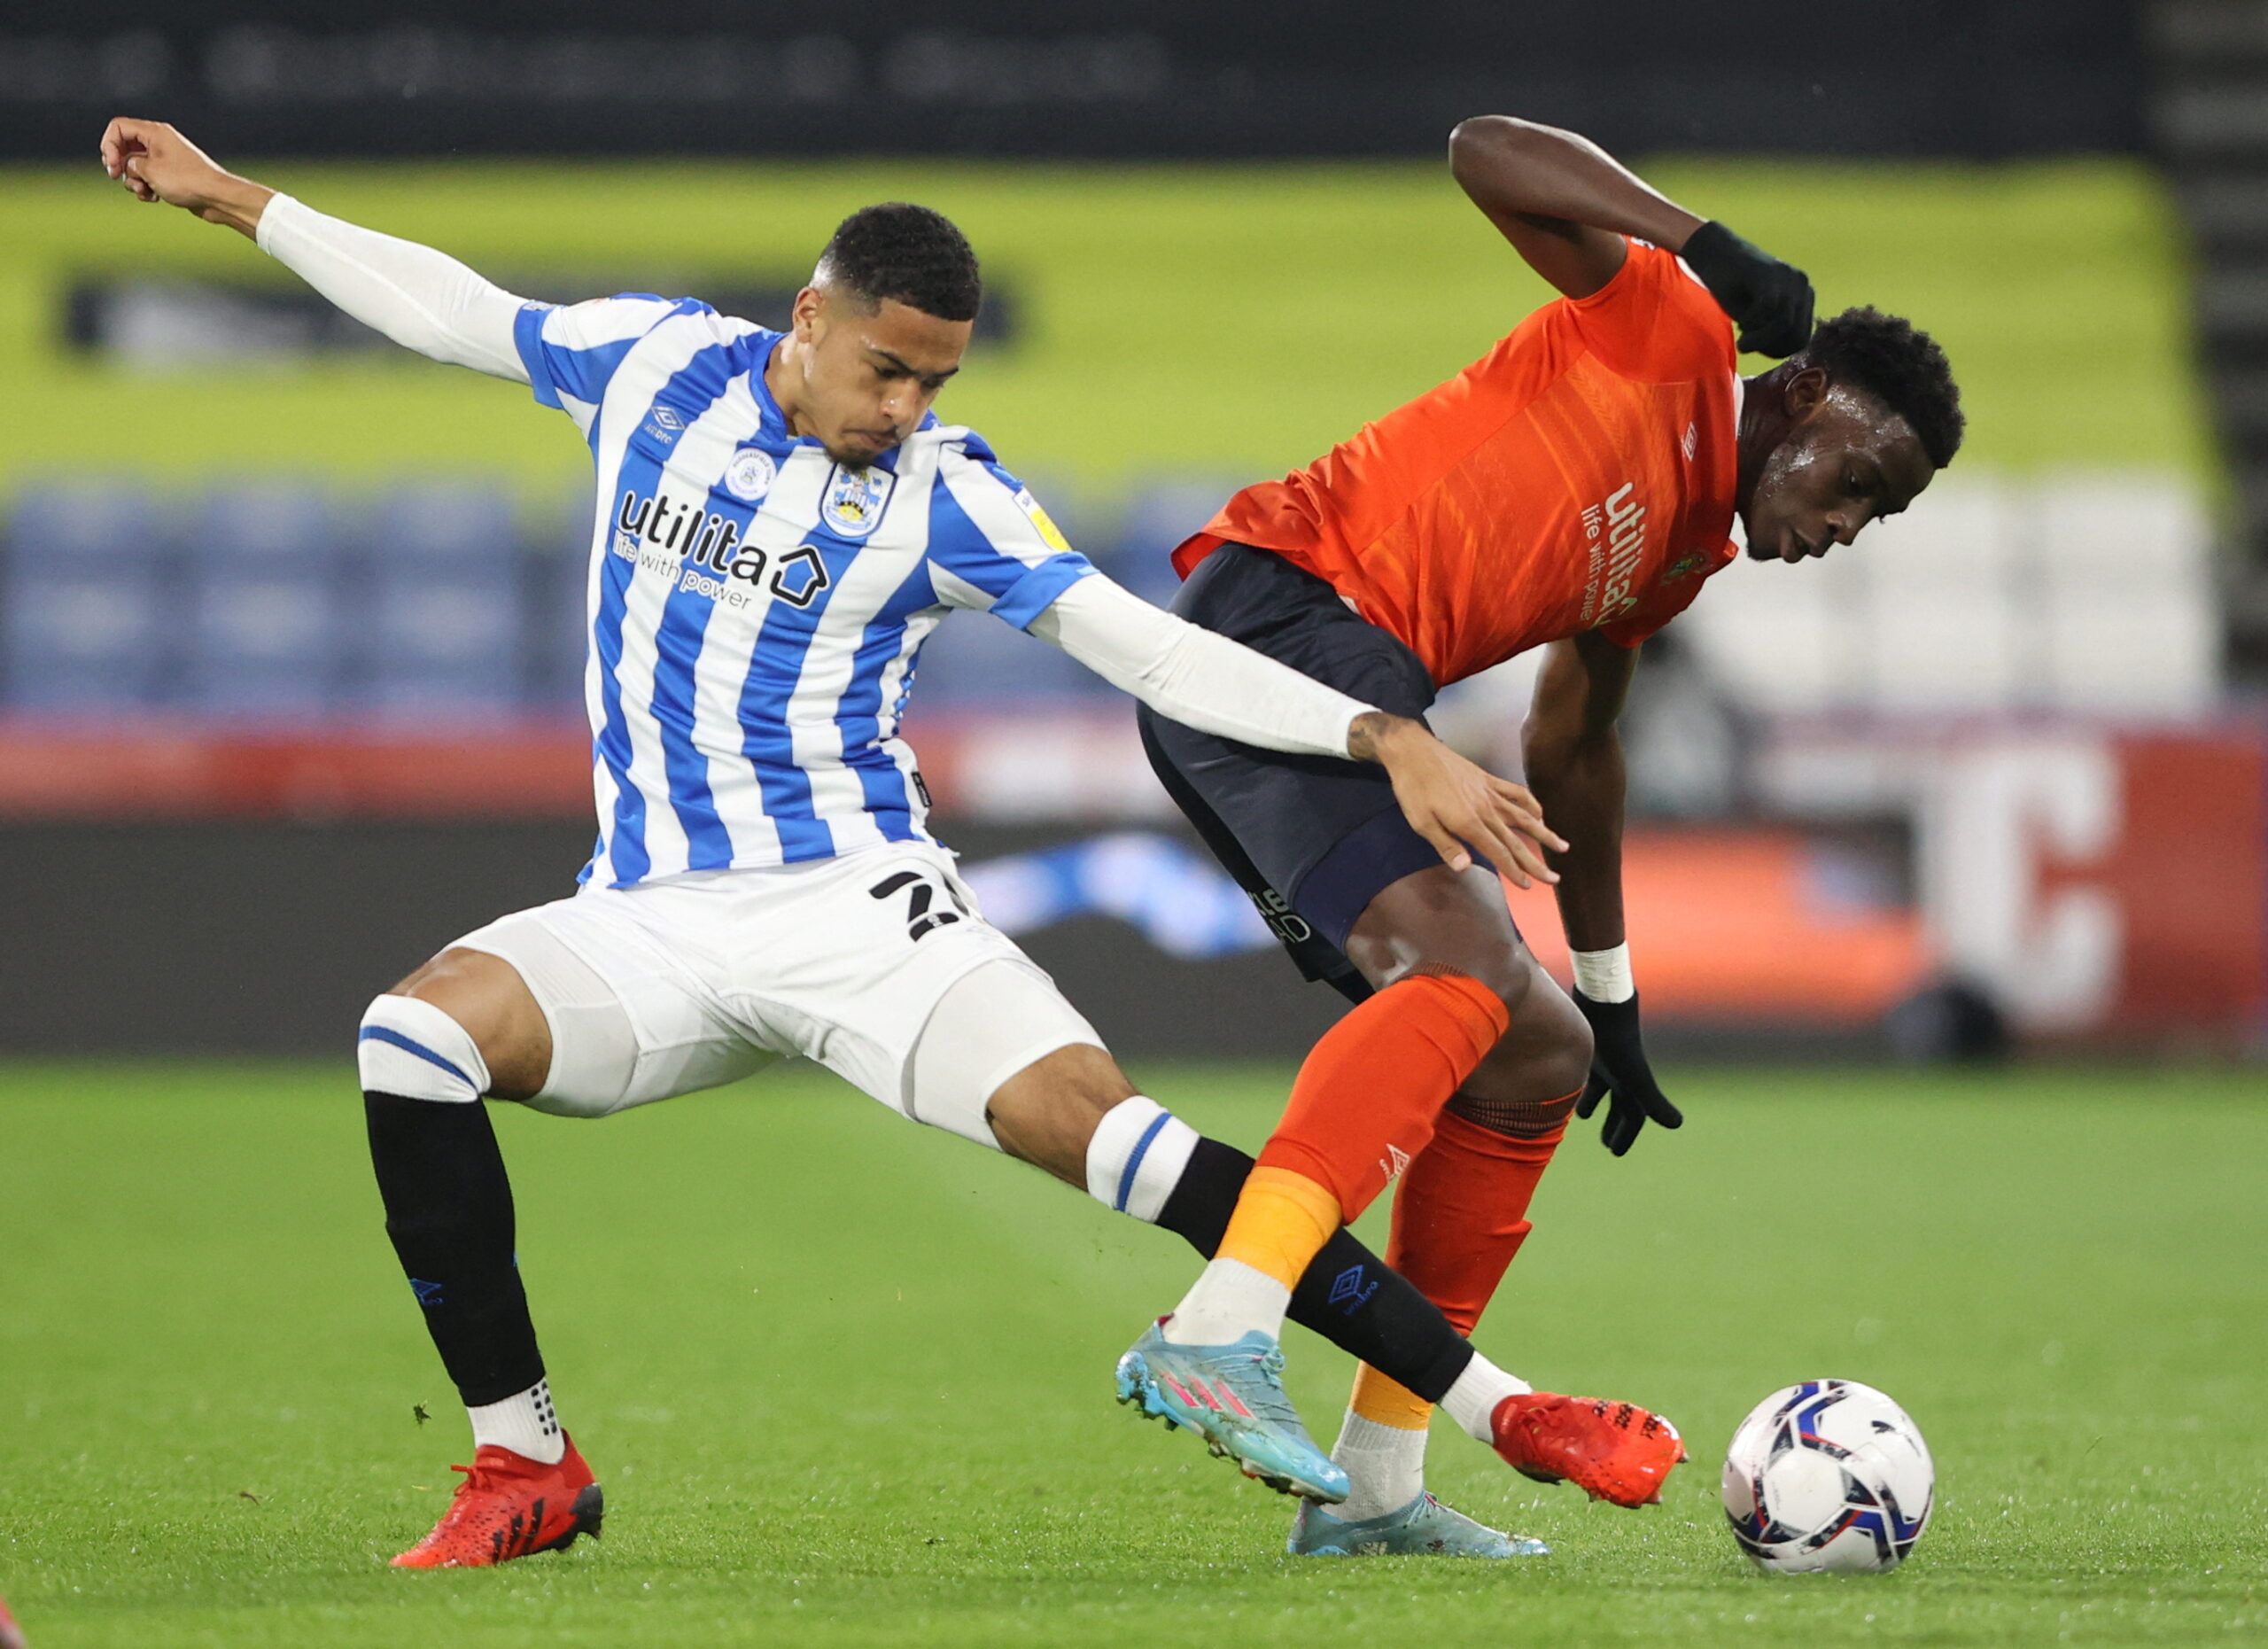 Soccer Football - Championship - Huddersfield Town v Luton Town - John Smith's Stadium, Huddersfield, Britain - April 11, 2022  Huddersfield Town's Levi Colwill in action with Luton Town's Elijah Adebayo  Action Images/Molly Darlington  EDITORIAL USE ONLY. No use with unauthorized audio, video, data, fixture lists, club/league logos or 